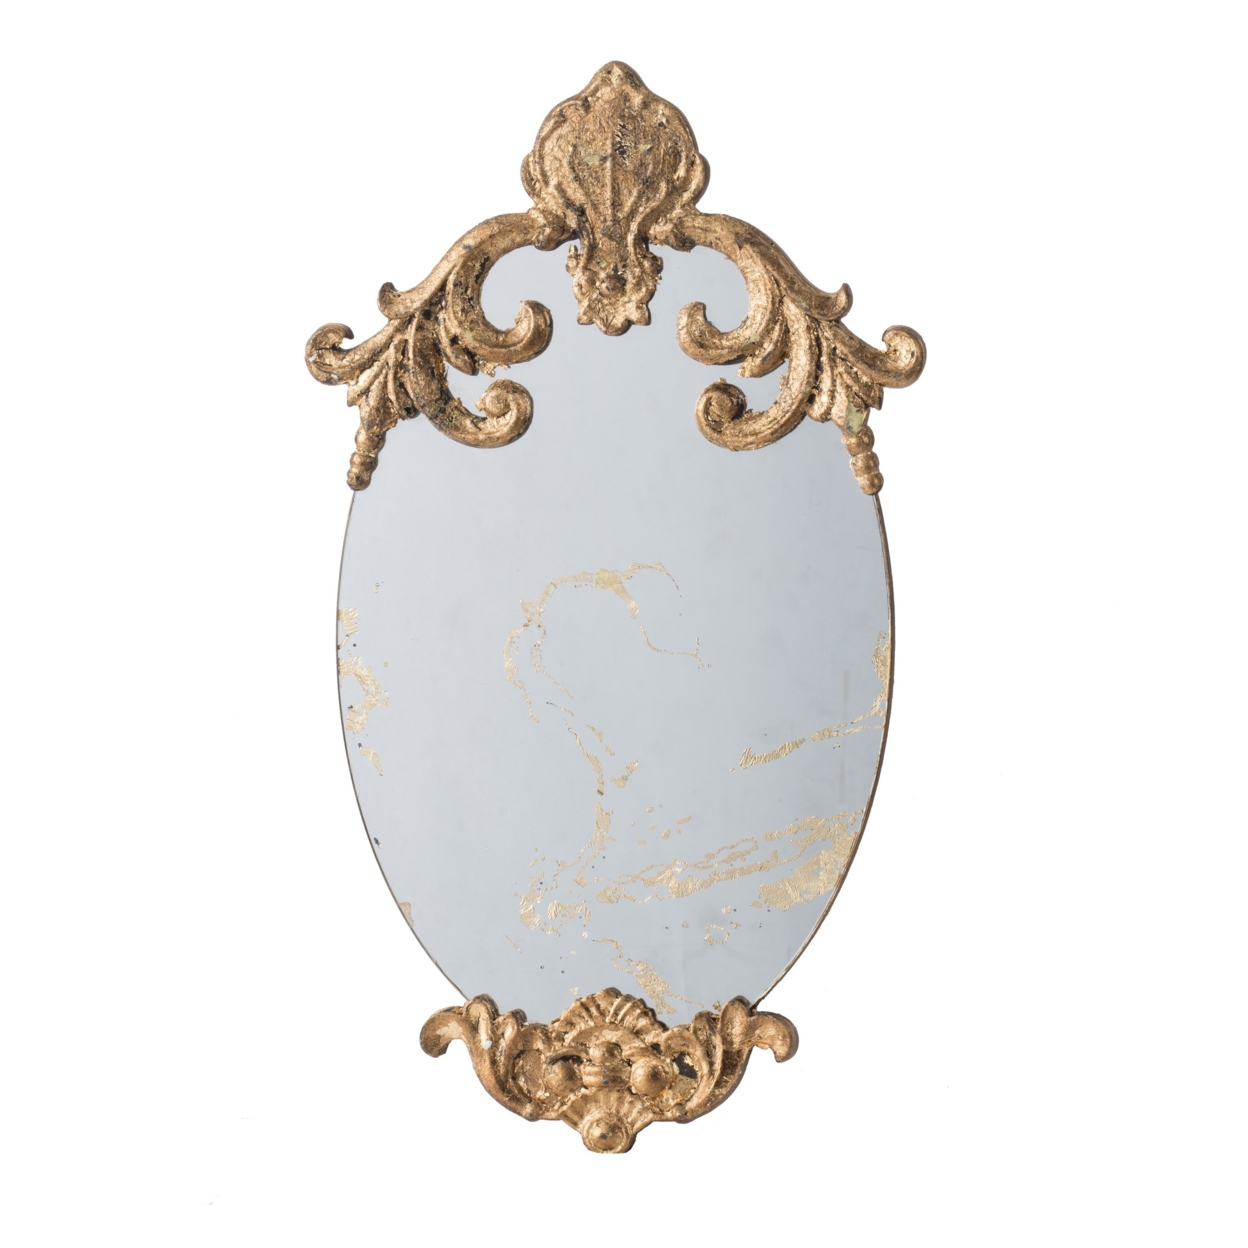 Vic 21 Inch Oval Wall Mirror, Ornate Scrolled Wood Frame, Antique Gold Finish- Saltoro Sherpi